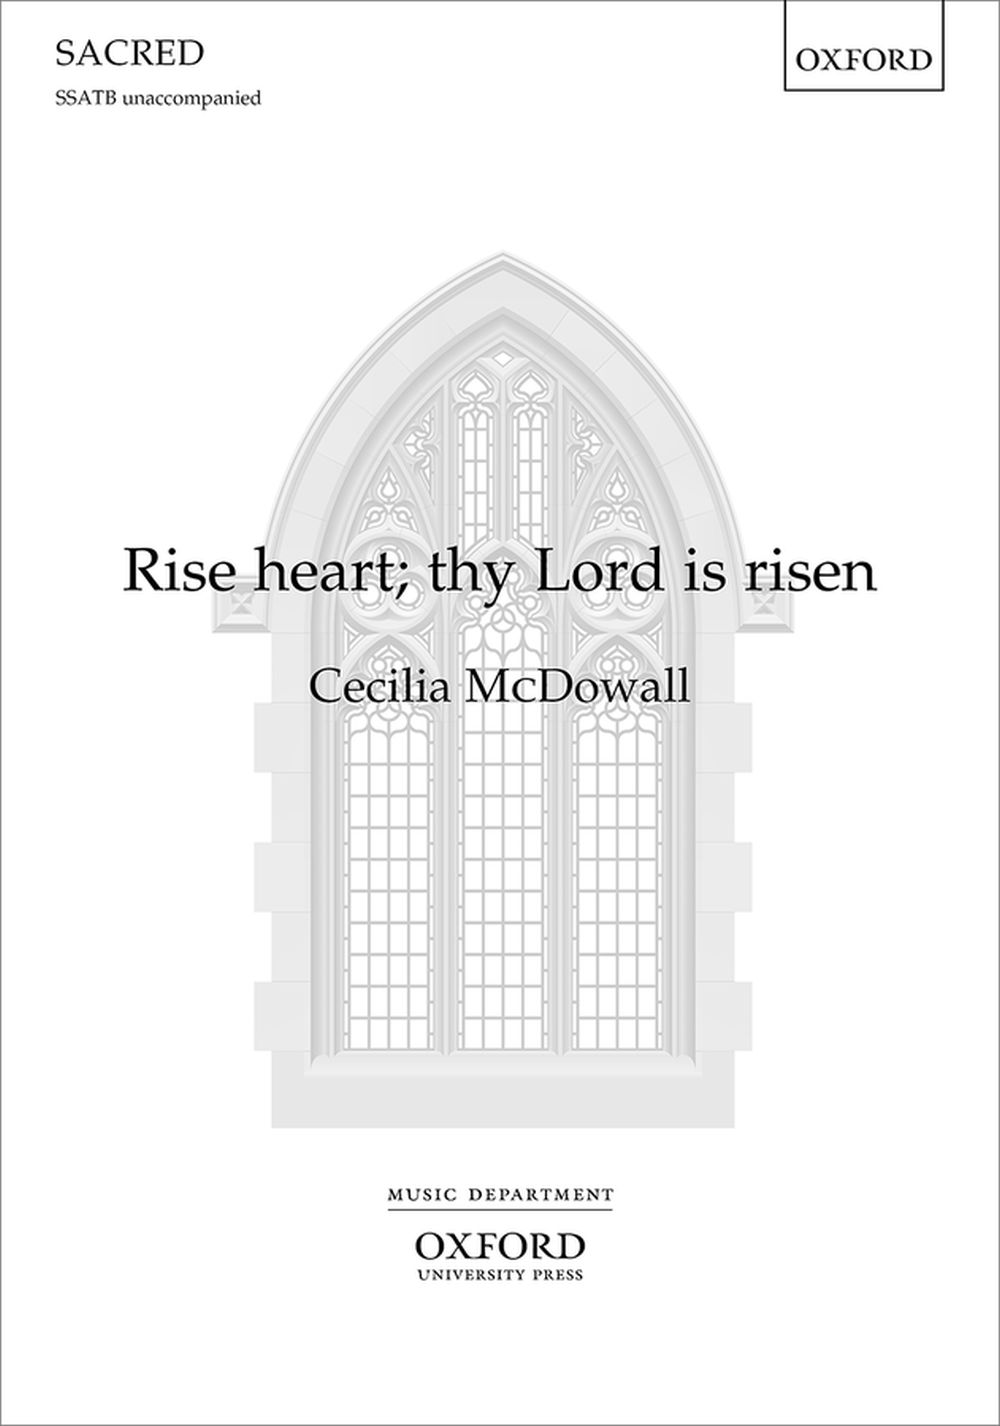 Cecilia McDowall: Rise heart: thy Lord is risen: SATB: Vocal Score